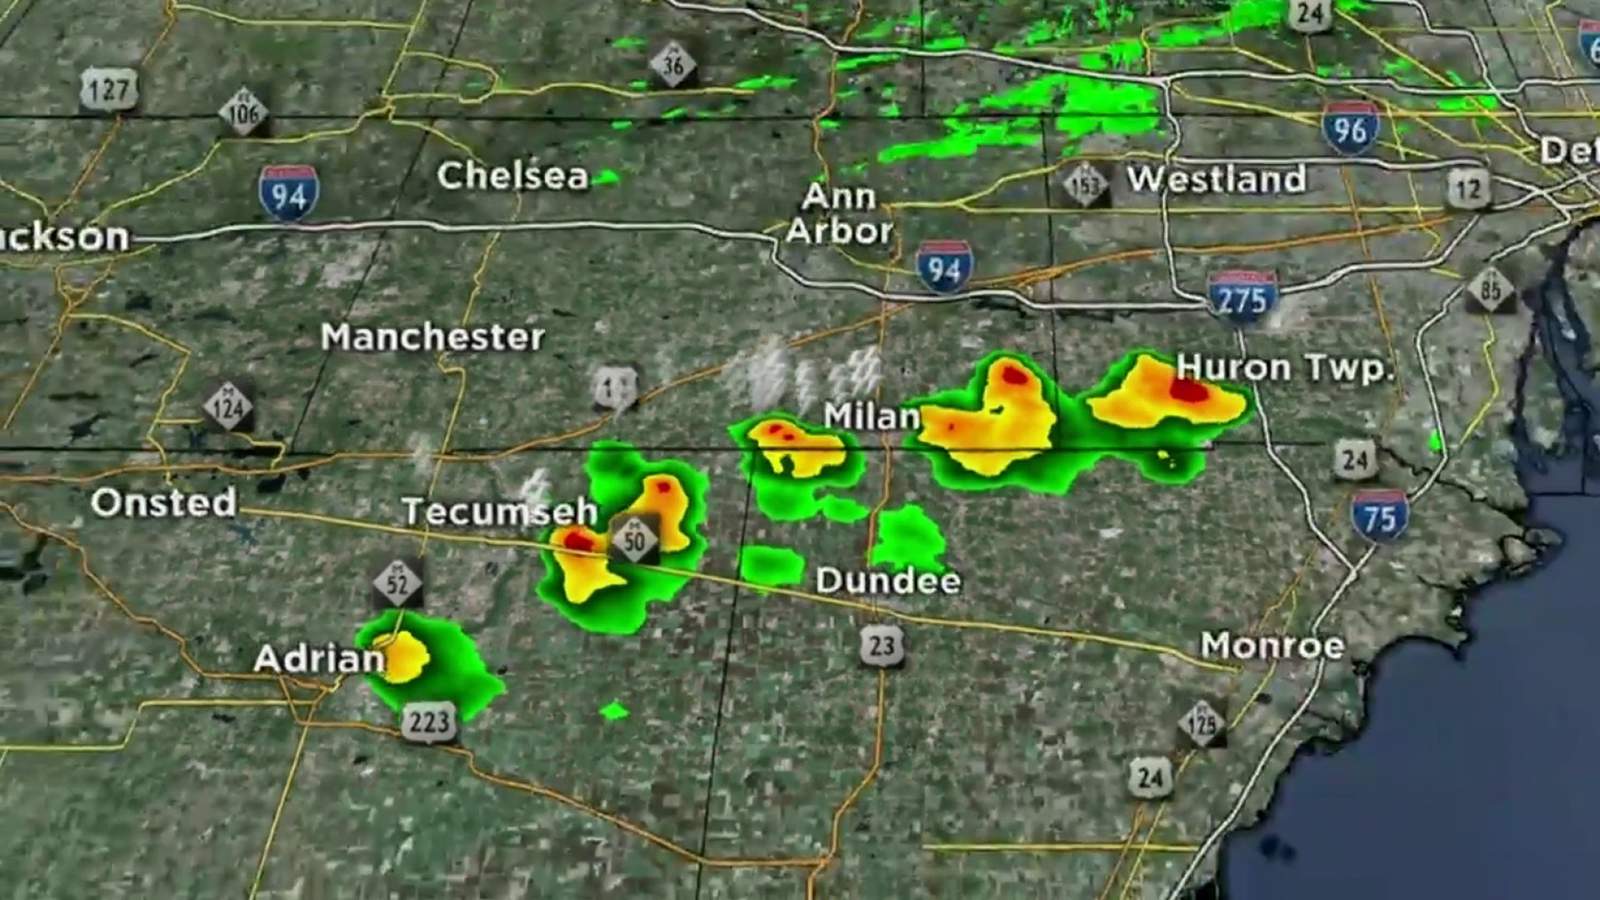 Metro Detroit weather: Summer-like temperatures and humidity remain Sunday evening